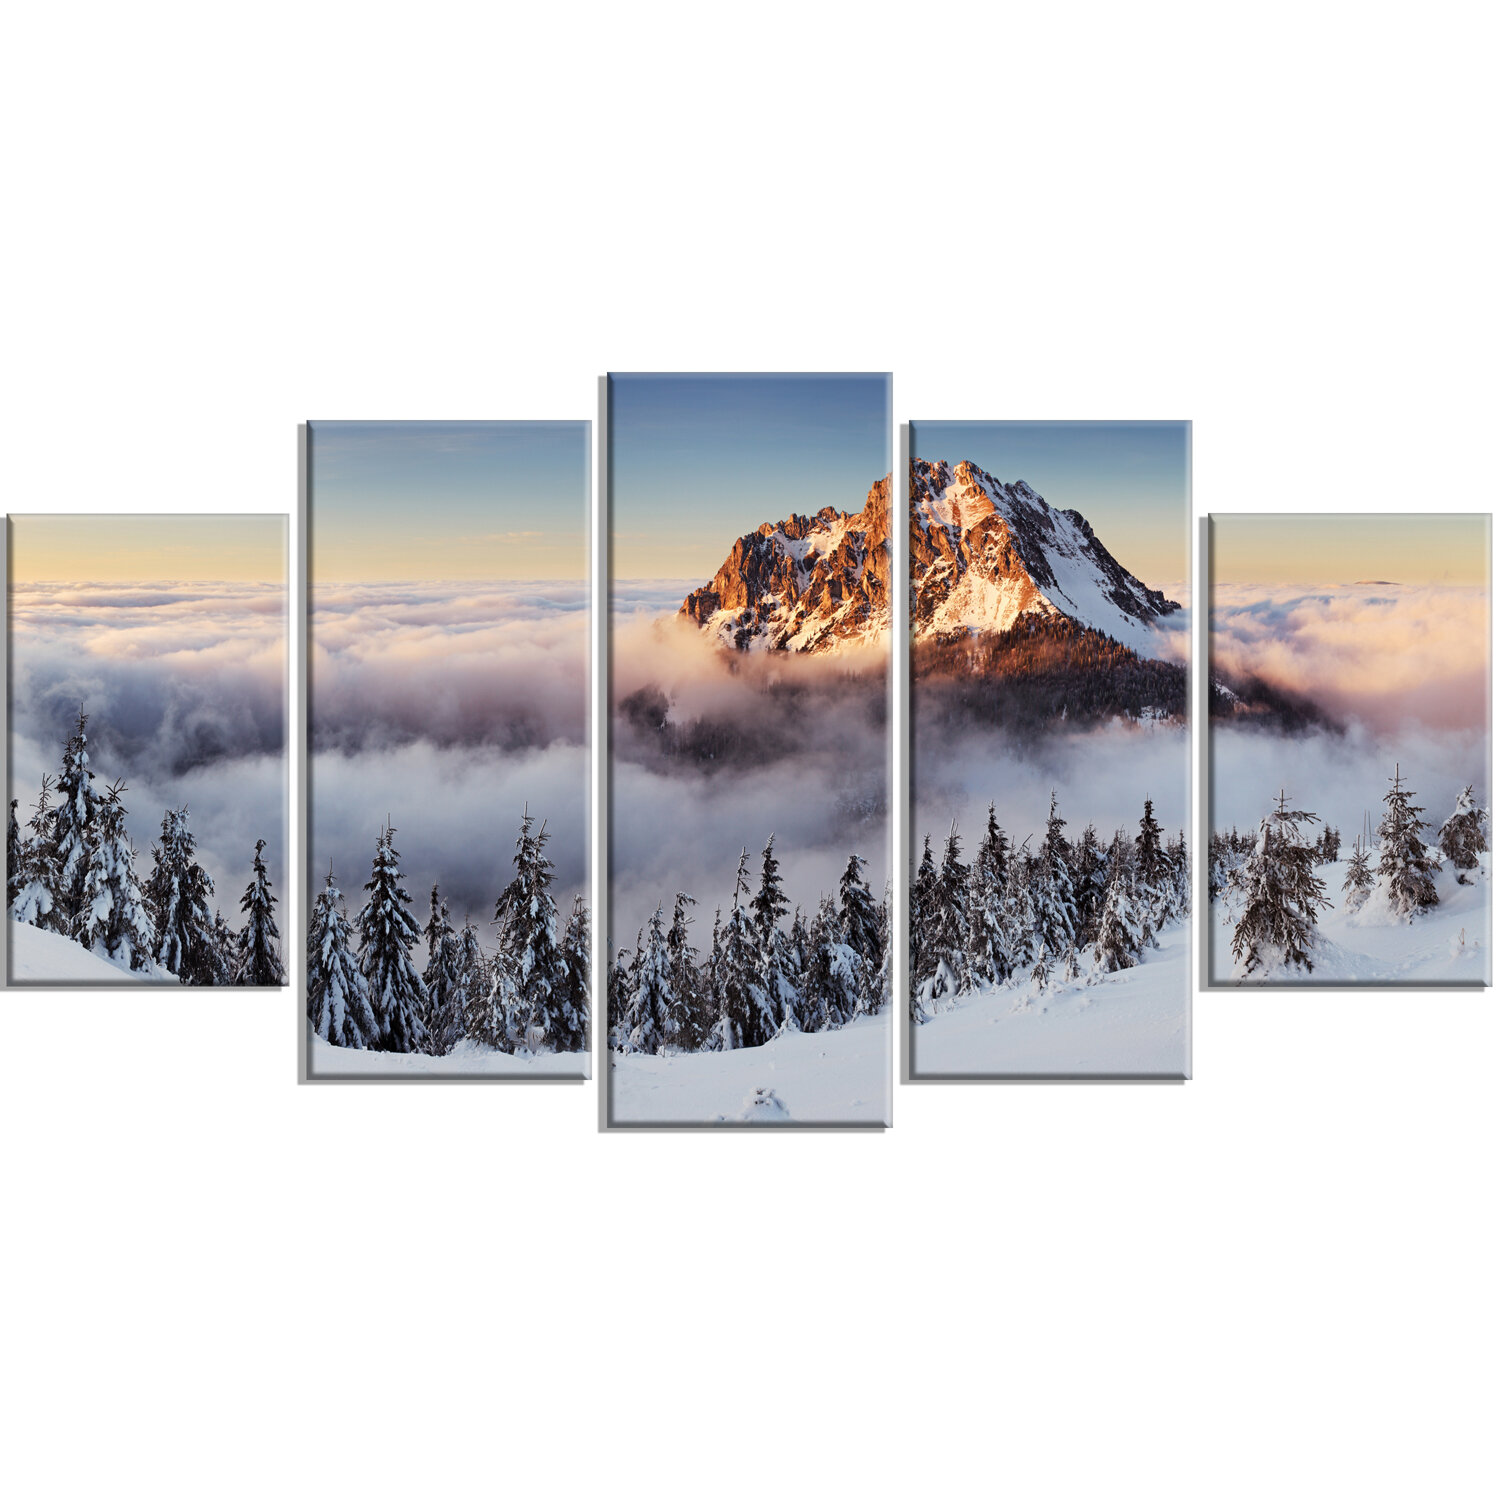 Millwood Pines Winter Mountain Landscape 5 Piece Wall Art On Wrapped Canvas Set Reviews Wayfair